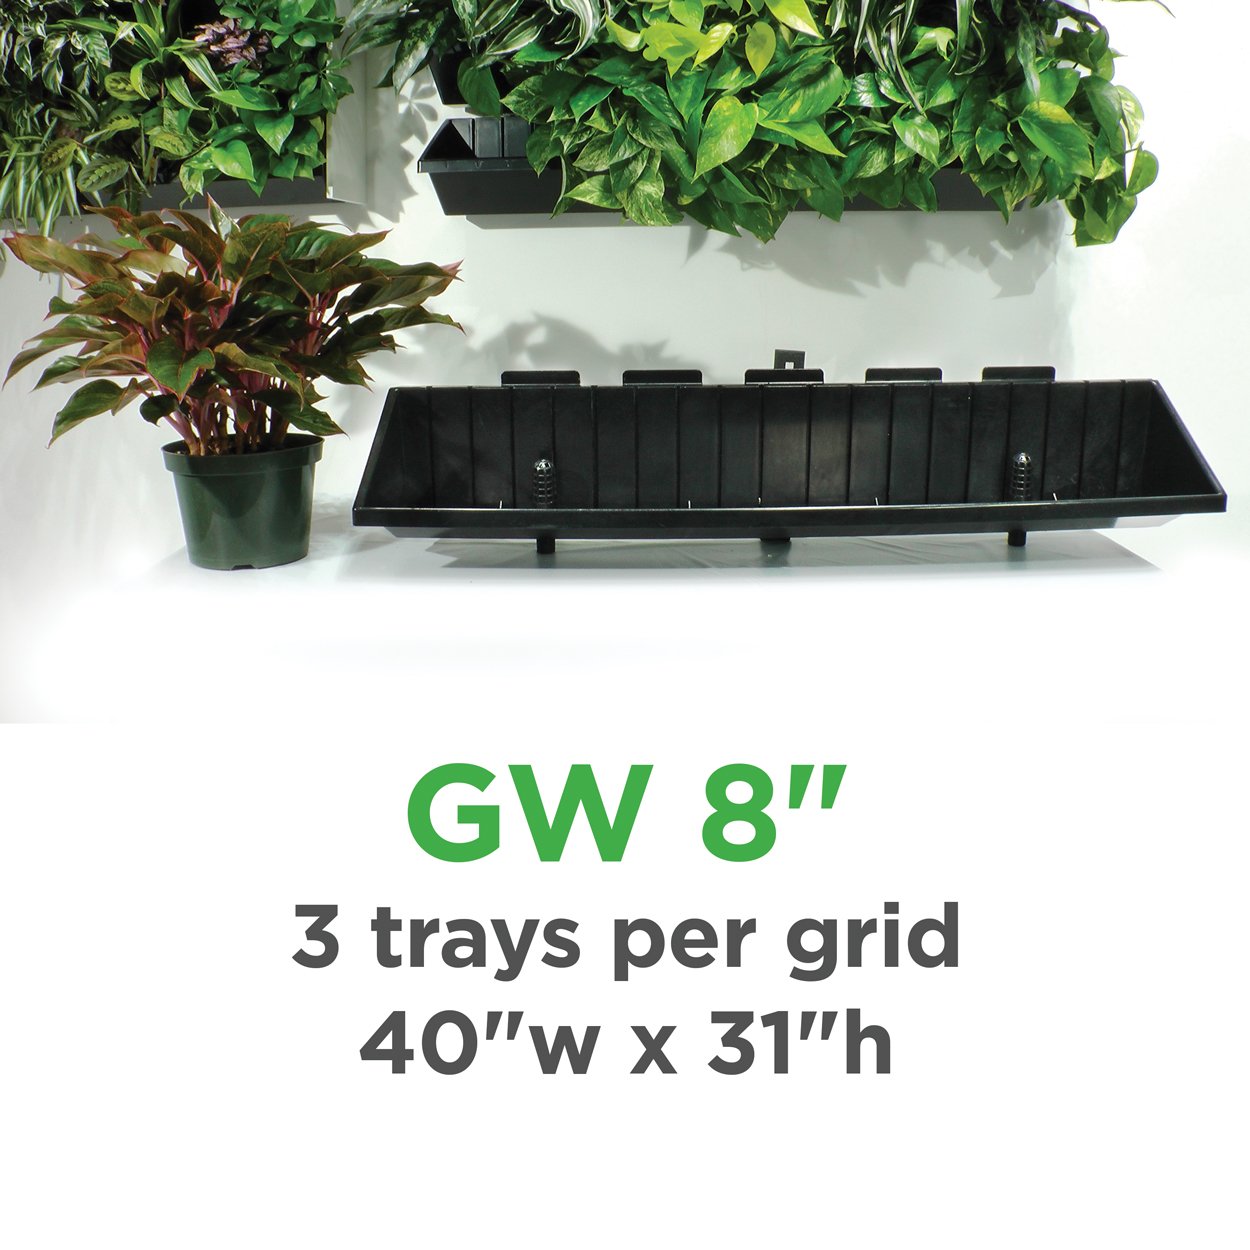 Plantups Green Walls Vertical Planter Kit for 8" Grow Pots comes with 3 Trays per Grid 40" wide